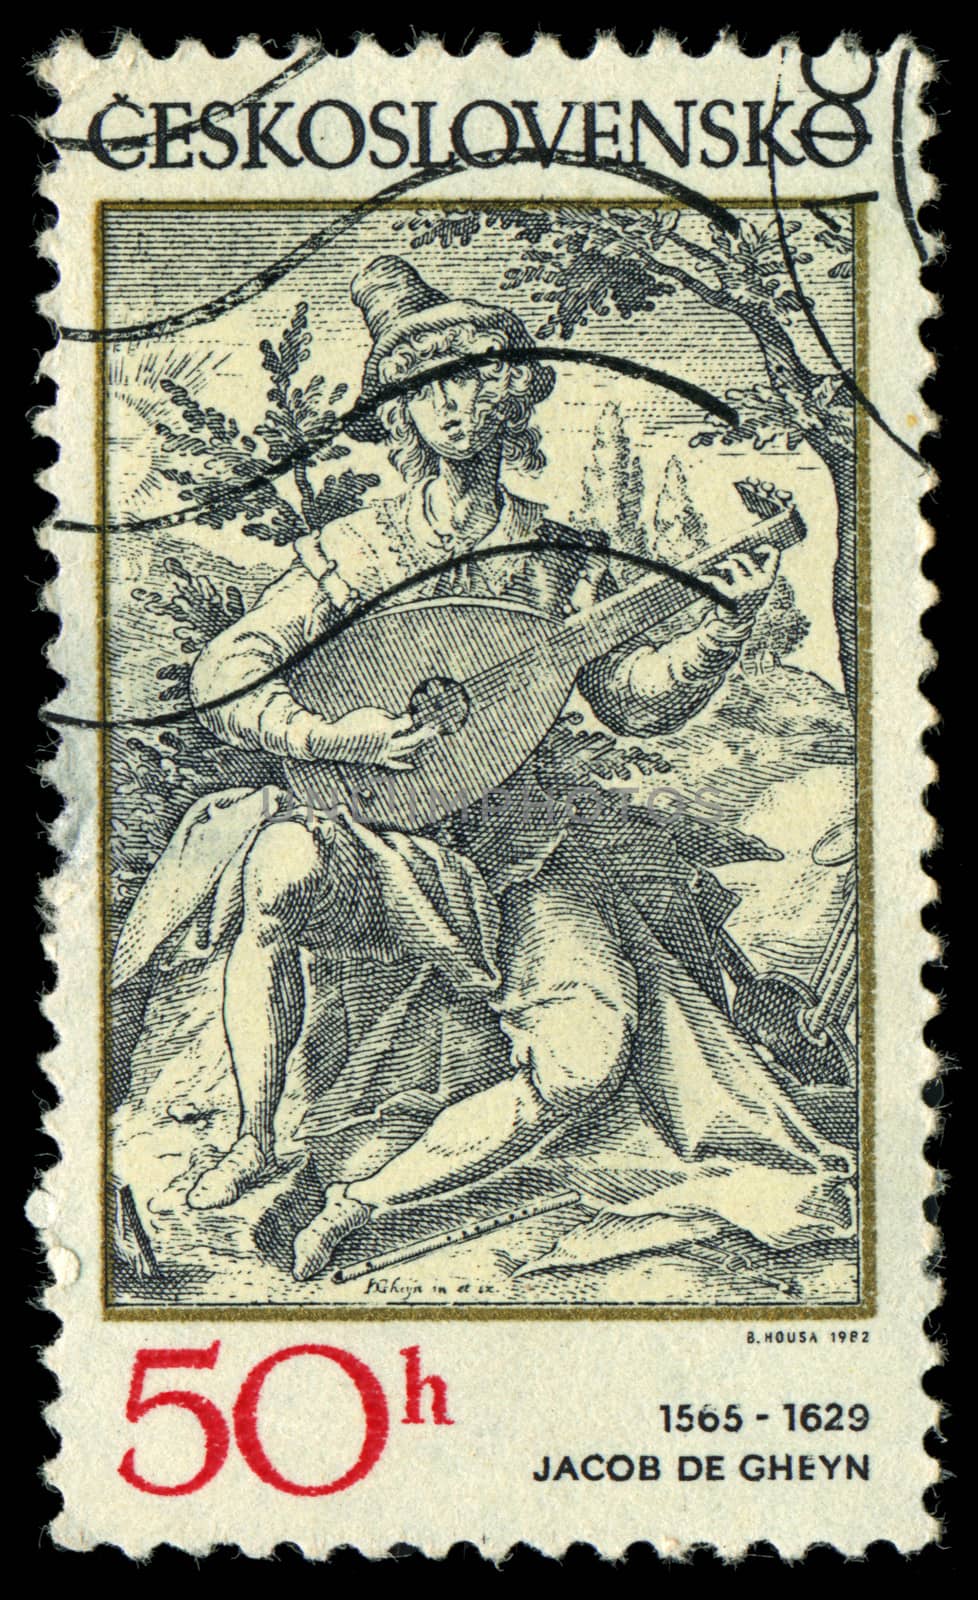 CZECHOSLOVAKIA - CIRCA 1982: A stamp printed in Czechoslovakia, shows the lute player, by Jacob de Gheyn (1565-1629), series, circa 1982 by Zhukow